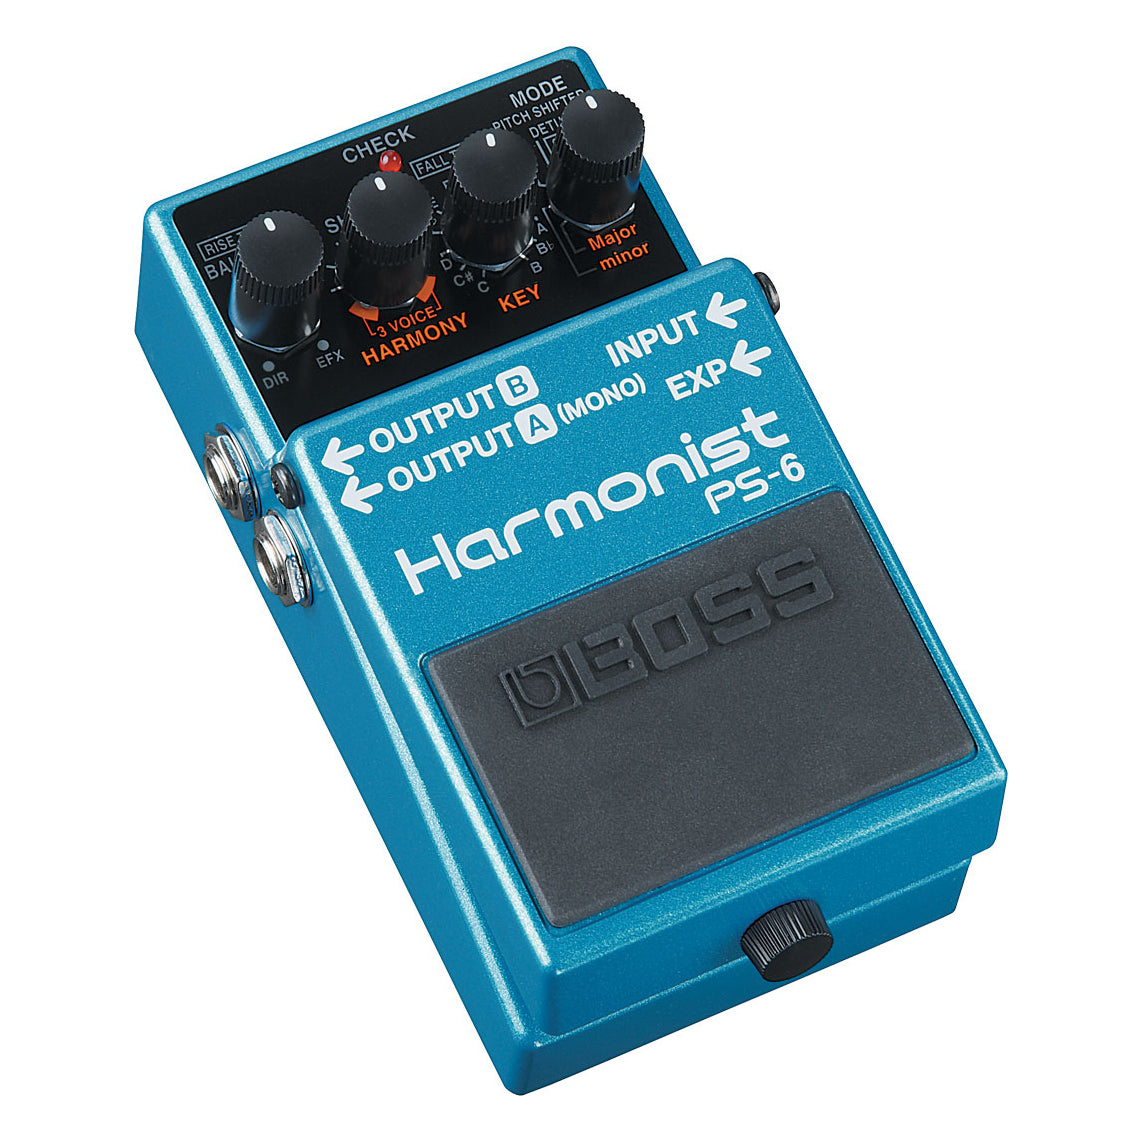 Boss PS-6 Harmonist Compact Pedal